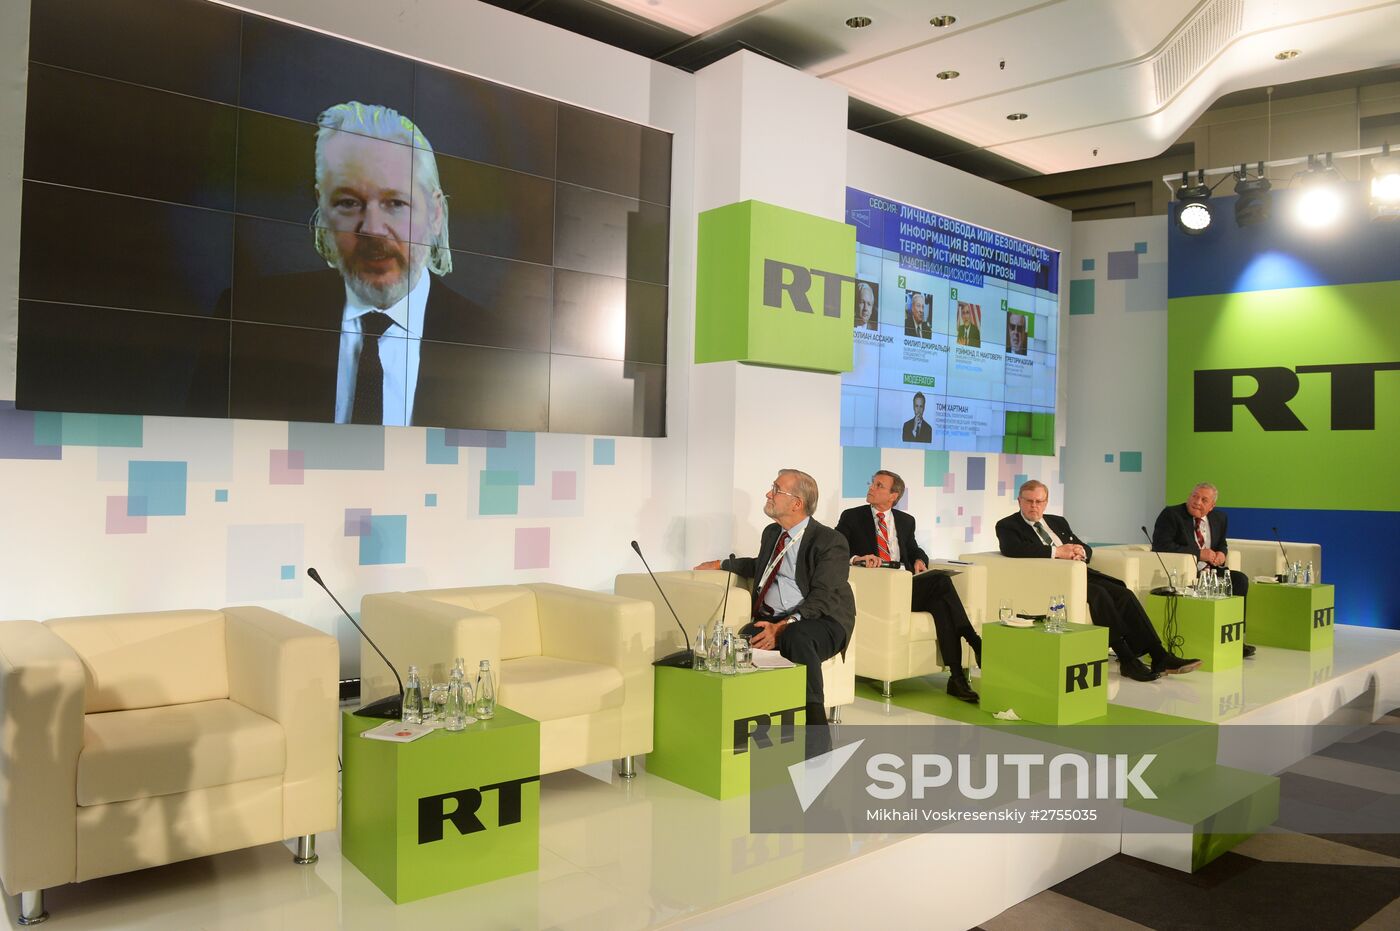 RT conference, Shape-shifting Powers in Today’s World